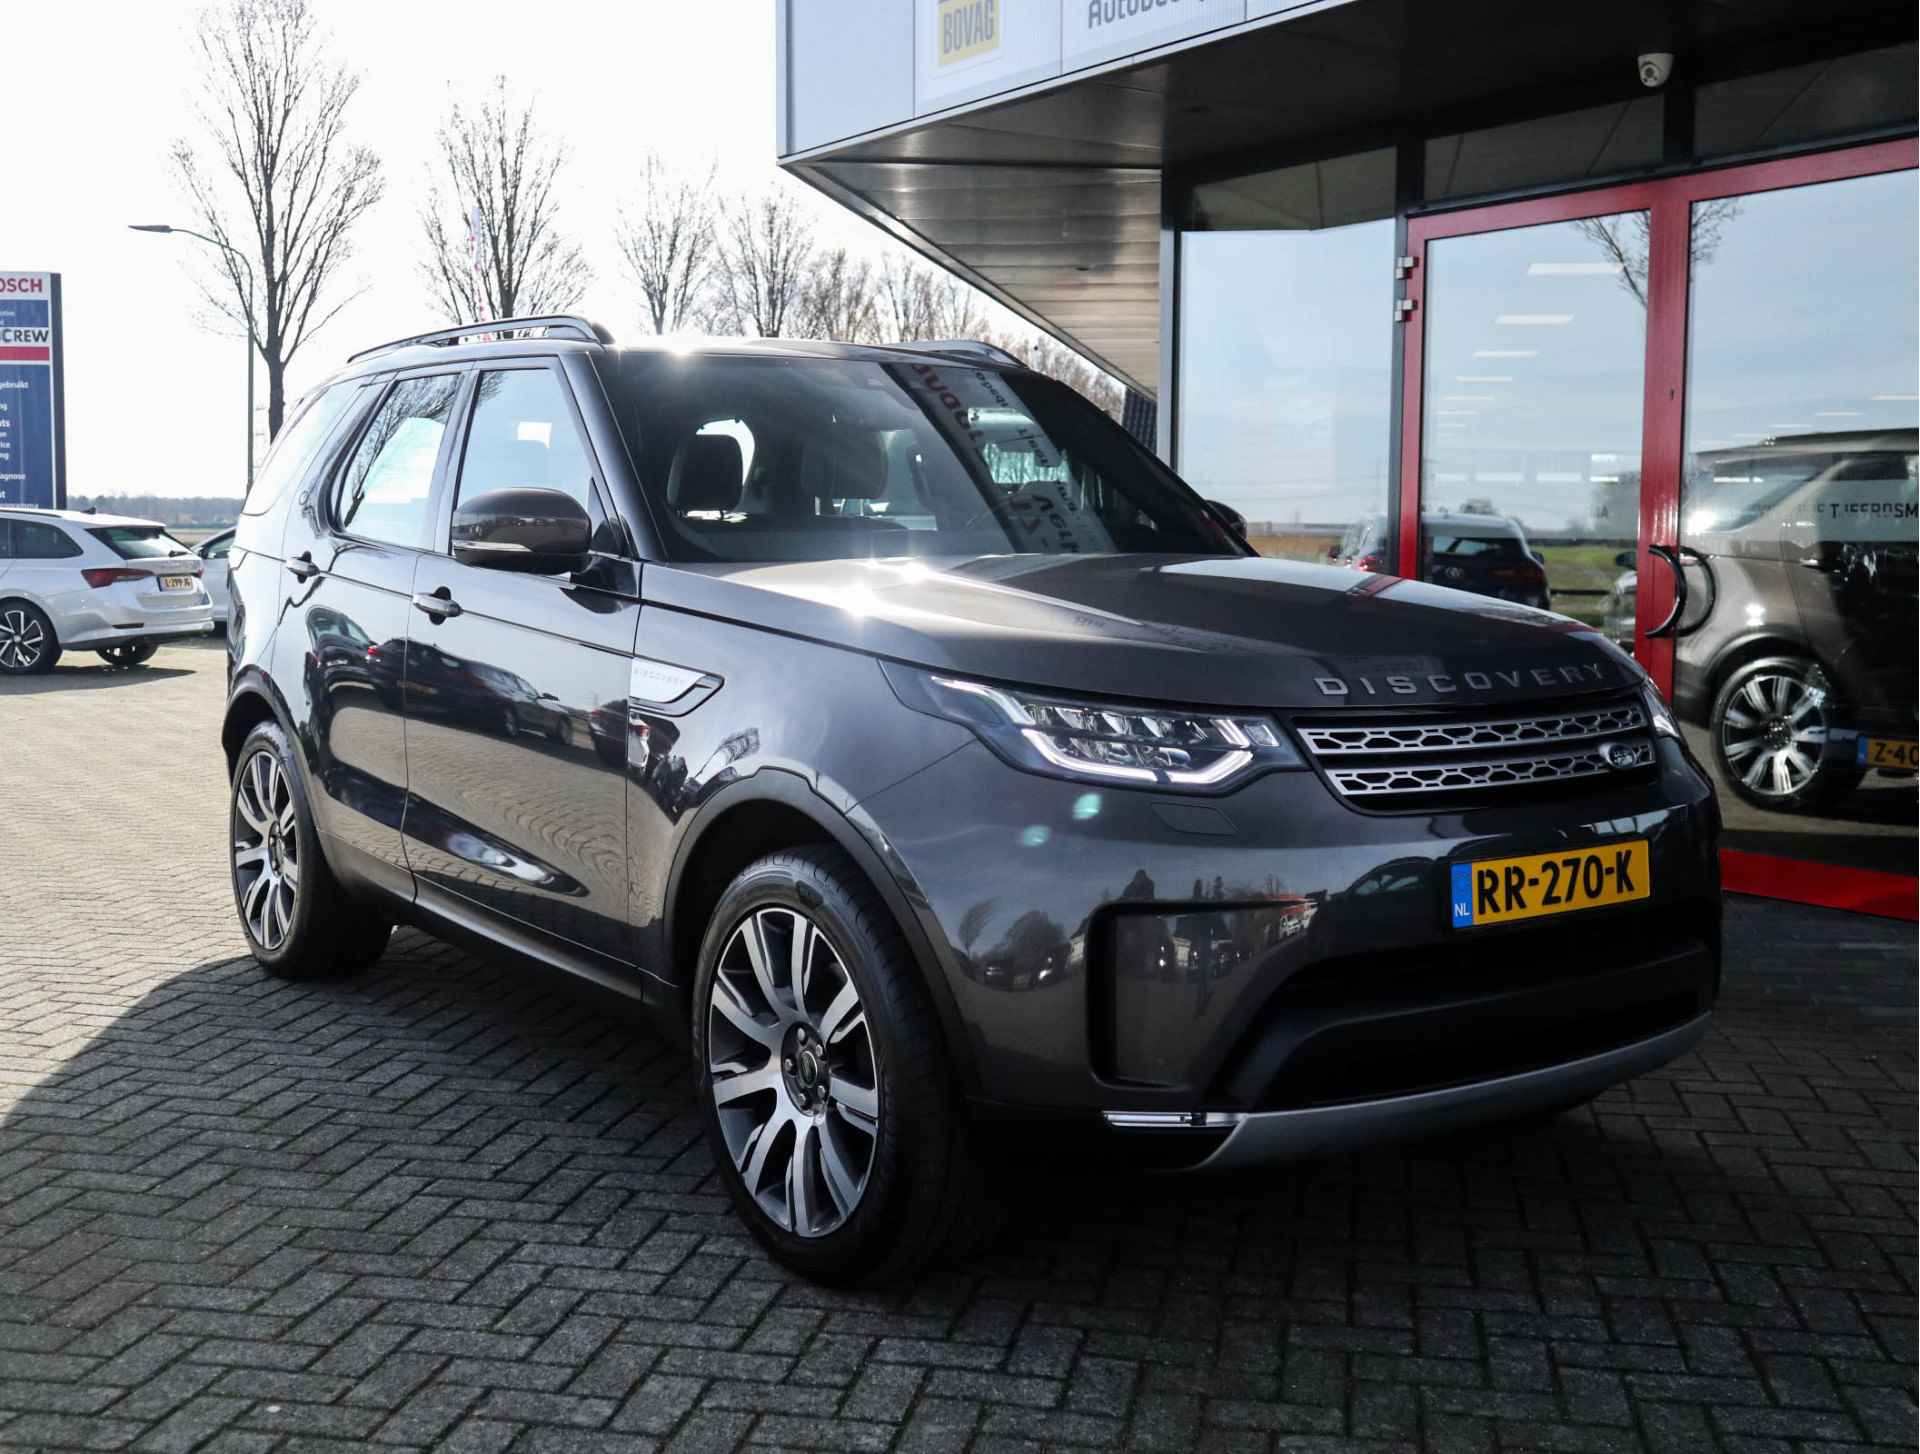 Land Rover Discovery 2.0 Sd4 HSE Luxury 7p. Navi/Clima/Leder/Panodak/7-Persoons/Luchtvering/Trekhaak - 12/34